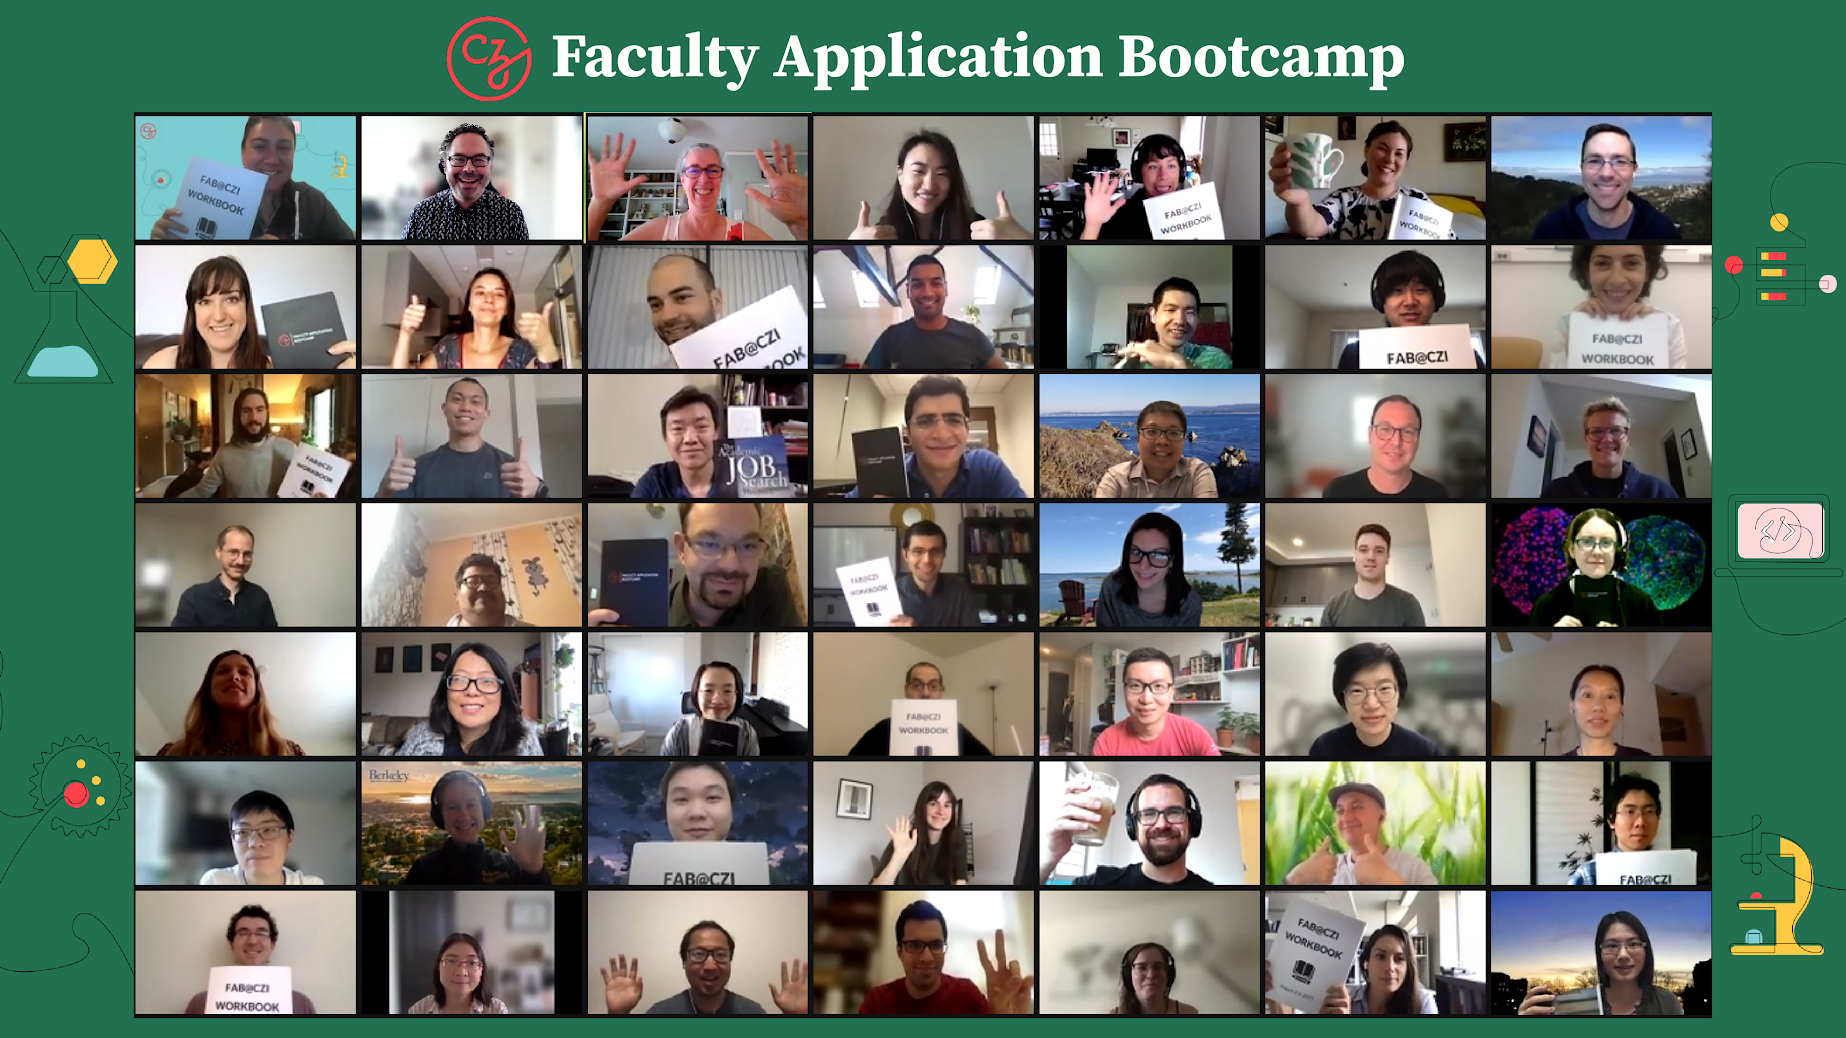 Participants at CZI’s Faculty Application Bootcamp pose waving on the Zoom platform.